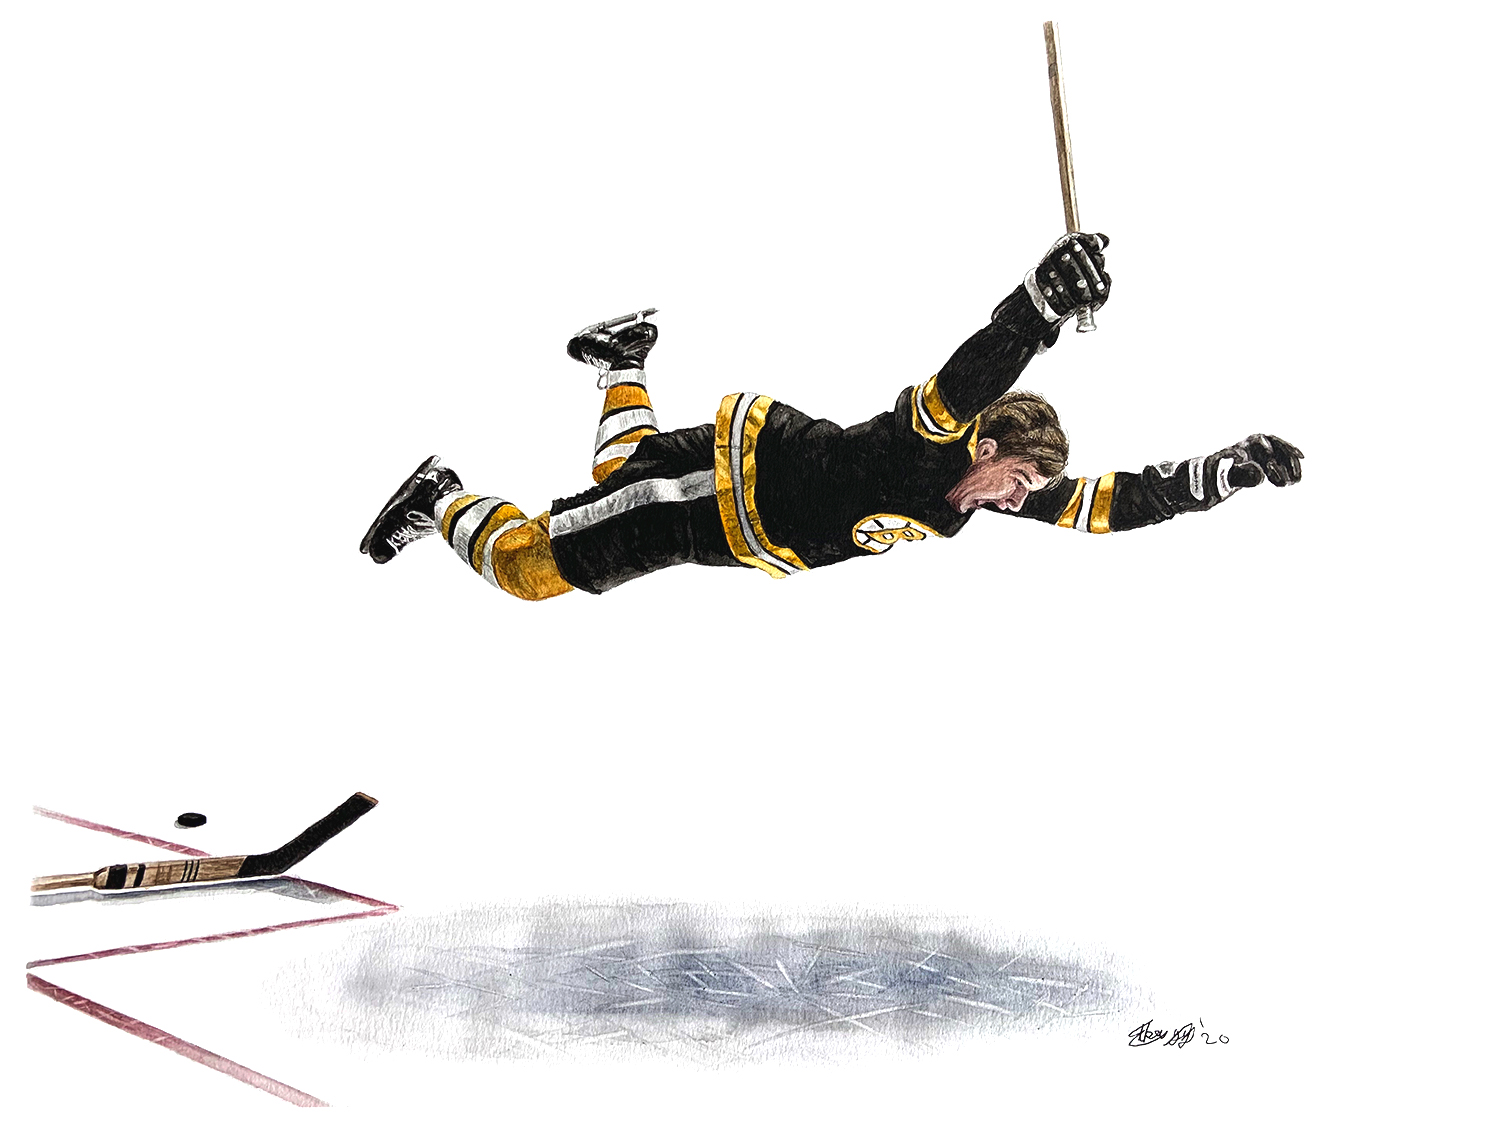 Remember When? Bobby Orr flies through air after winning Stanley Cup